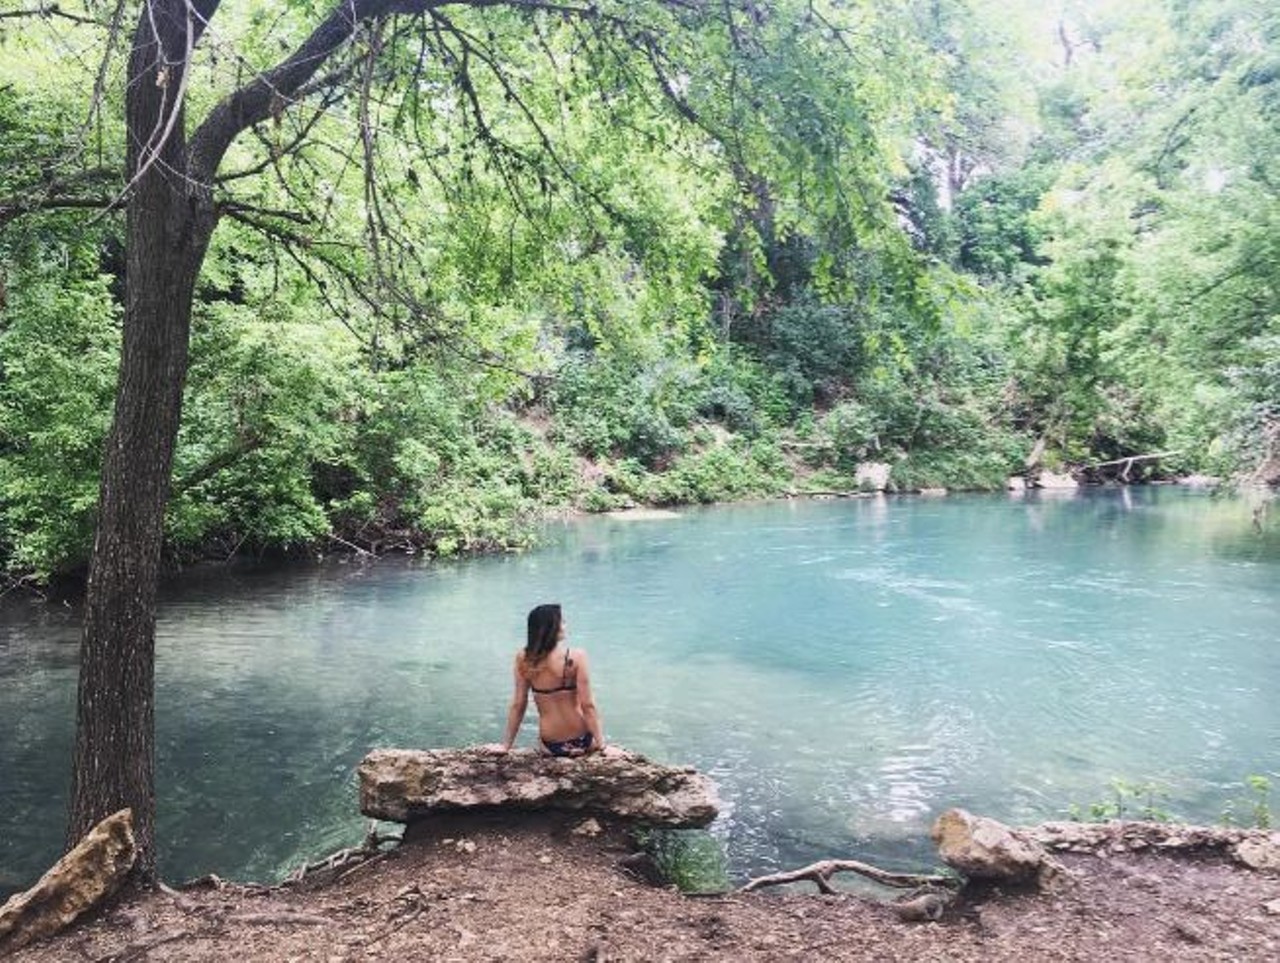 Rio Vista Falls in San Marcos
555 Cheatham St., San Marcos, (512) 393-8400
Are you ready to relax in the crystal-clear falls of the San Marcos River? For Free? I don&#146;t think you&#146;re ready. Grab some friends and some floaties, and get ready to have some summer fun. Just stay hydrated, and don&#146;t litter.
Photo via Instagram, a_evanss